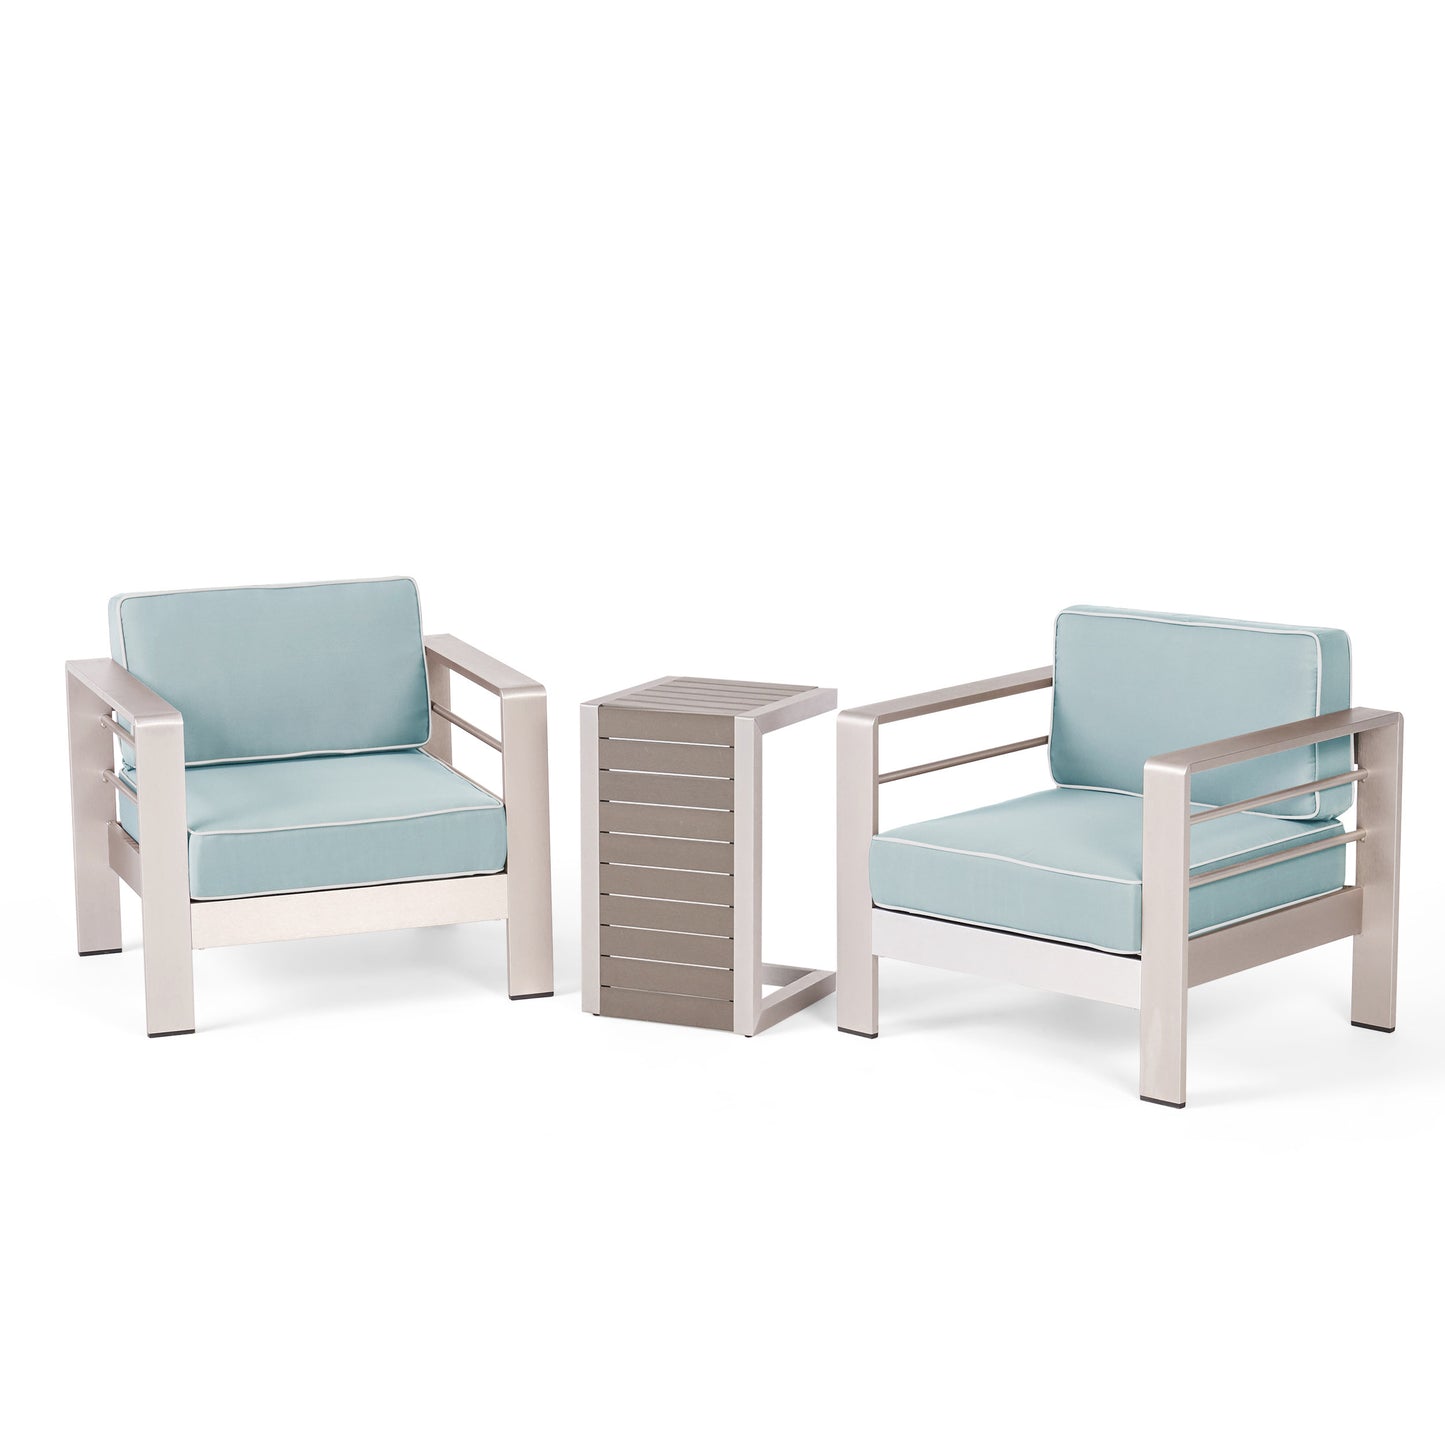 Crested Bay Outdoor 3 Piece Aluminum Framed Chat Set with Wicker C-Shaped Side Table